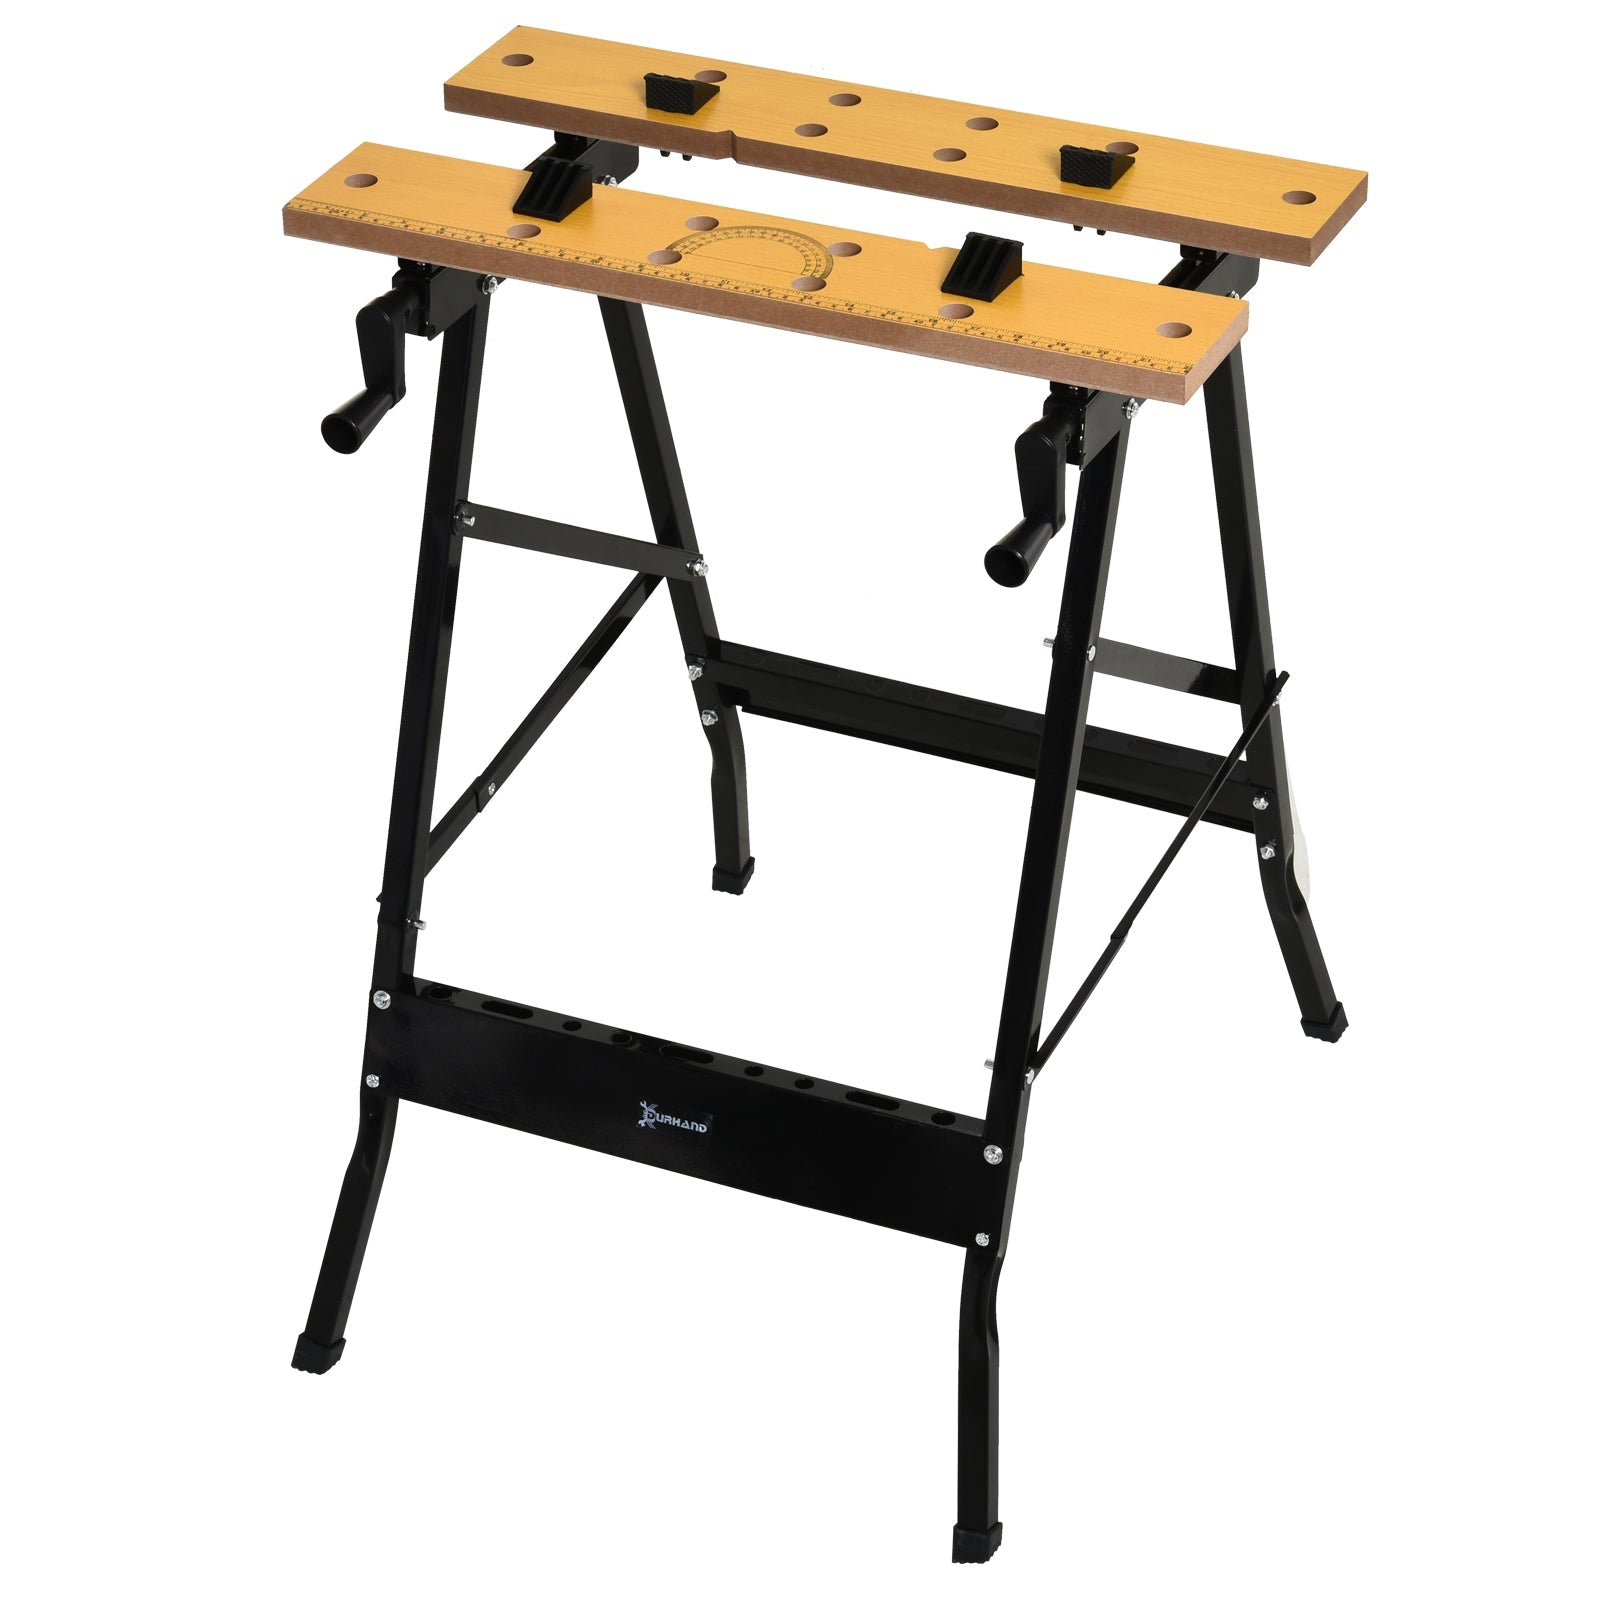 Foldable Work Bench w/ Adjustable Clamps, Carpenter Saw Table, MDF Surface, Steel Frame, 100kg/220lbs Capacity at Gallery Canada